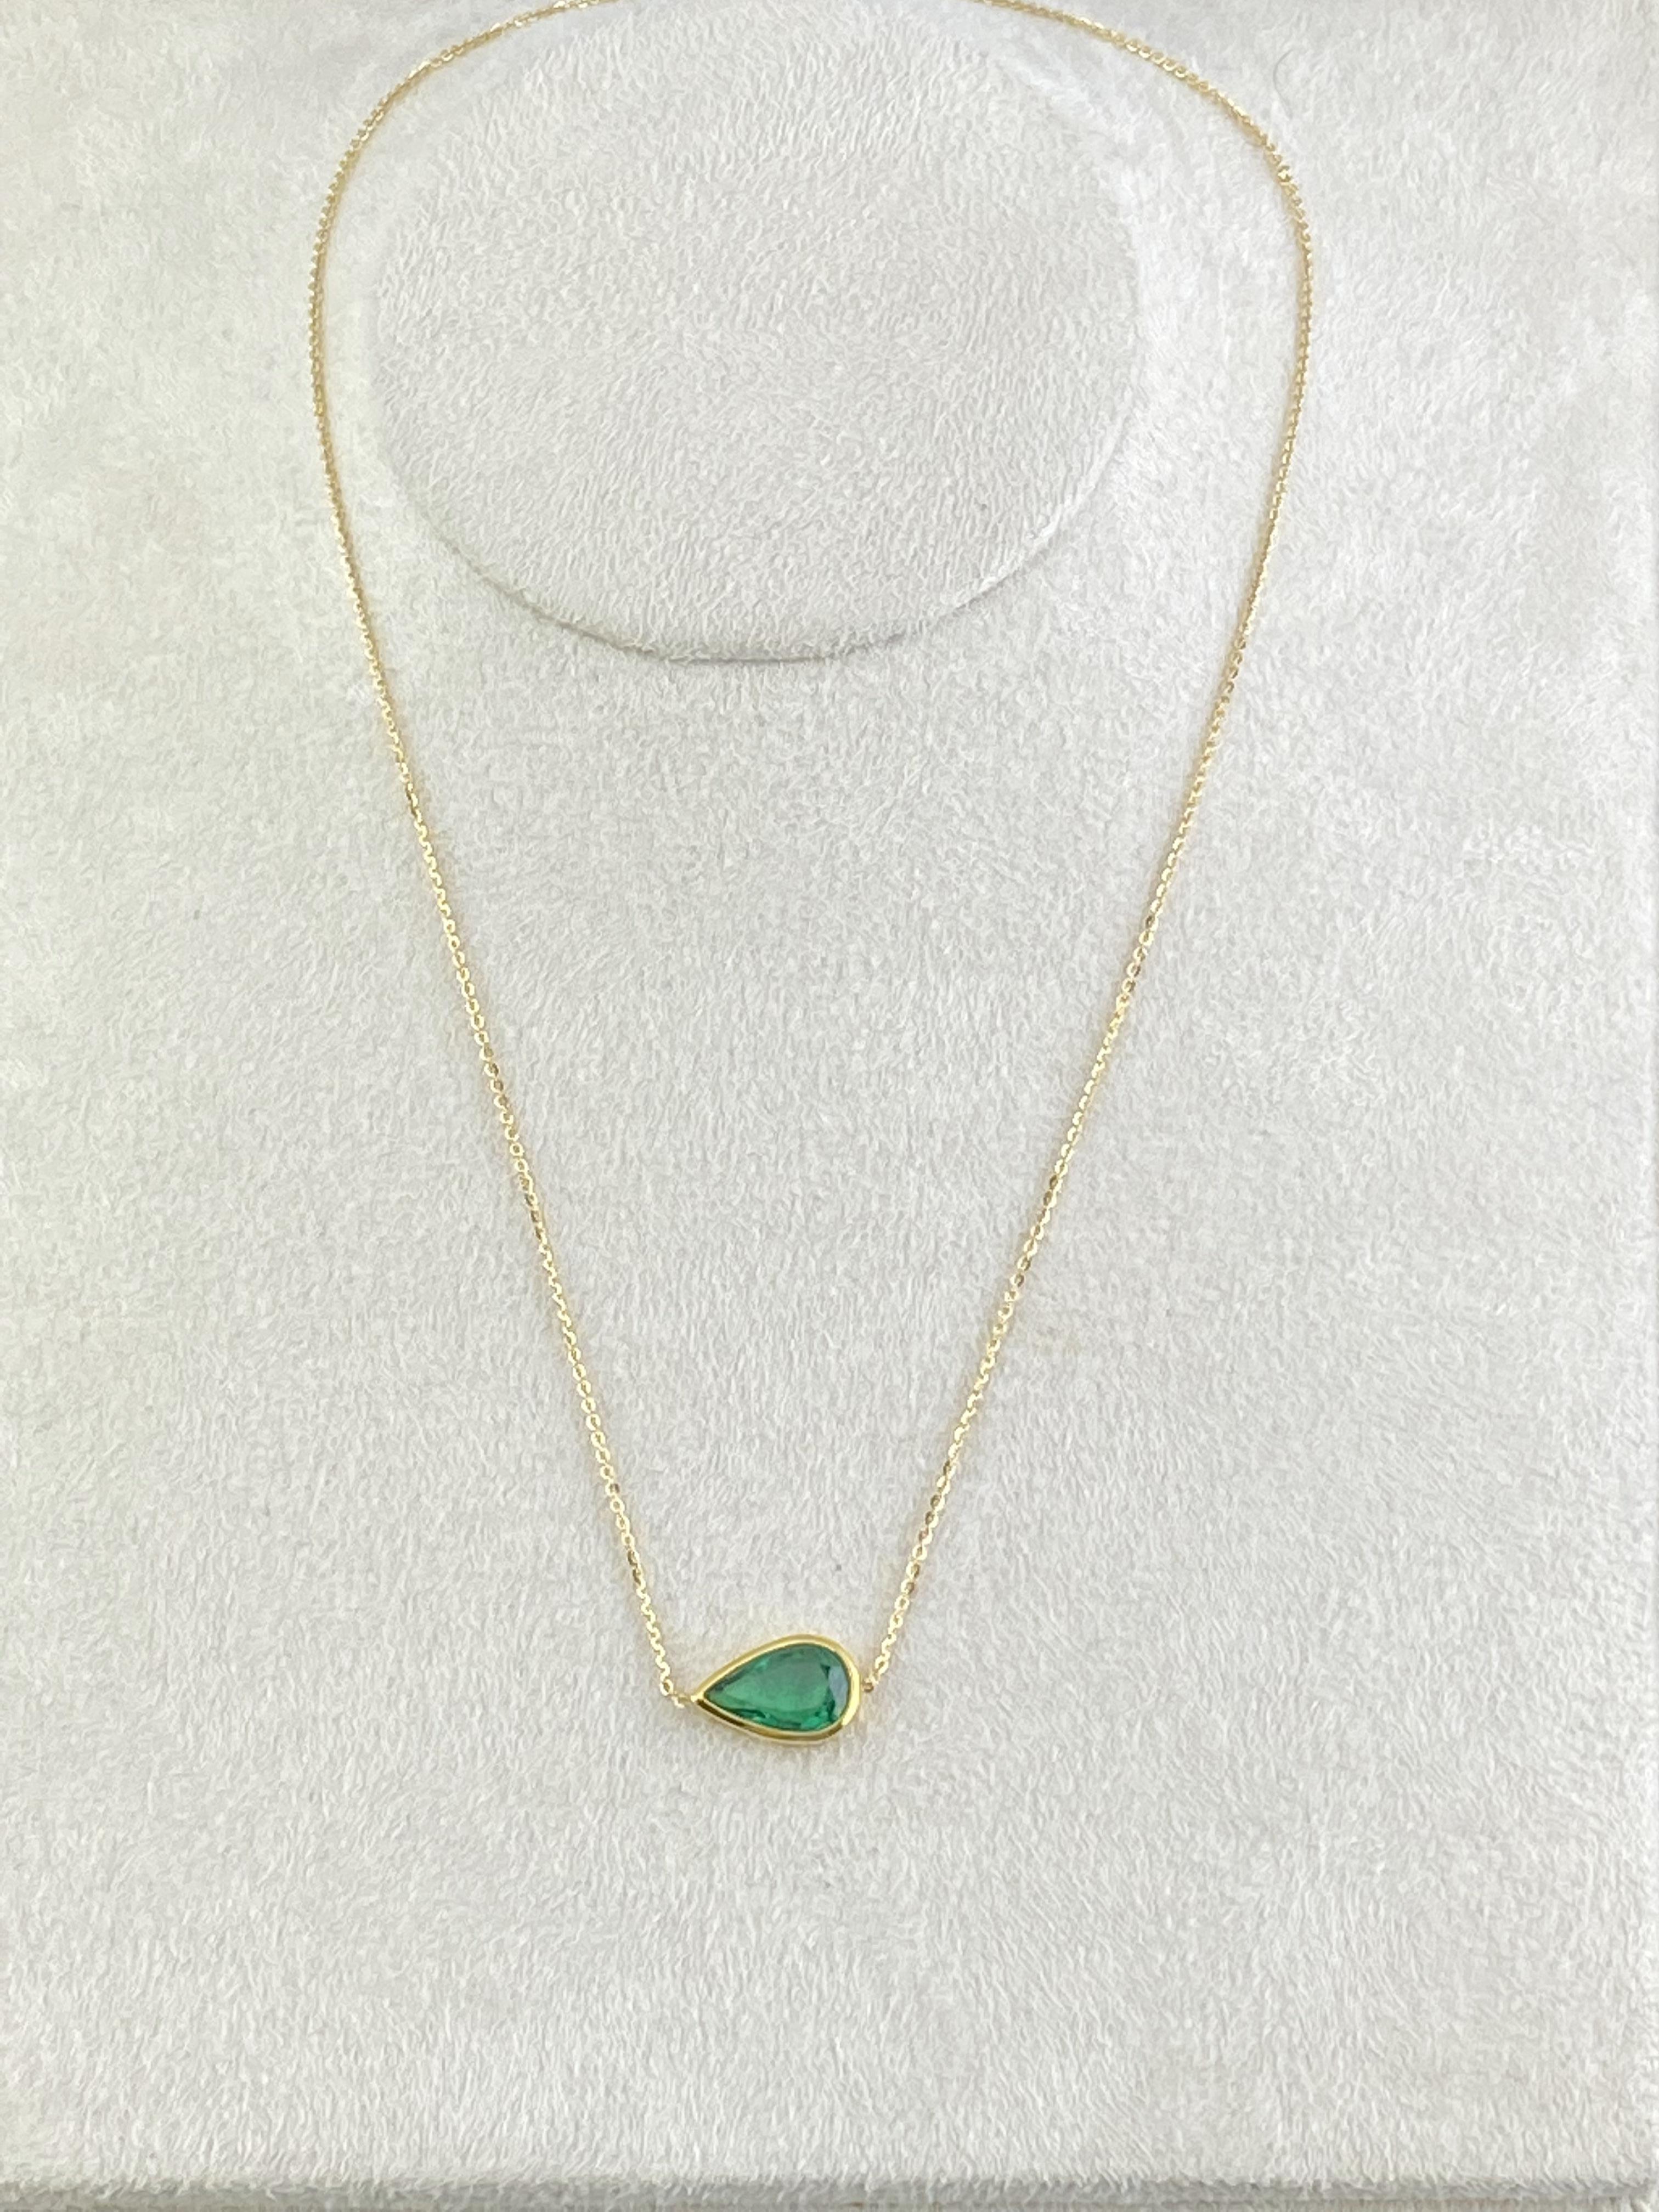 A classic 1.65 carat pear shape Zambian Emerald pendant, attached to a 16 inch 18K Yellow Gold chain. The natural Emerald is of very high quality, absolutely transparent, with a great amount of luster and a beautiful vivid green color.
Please feel